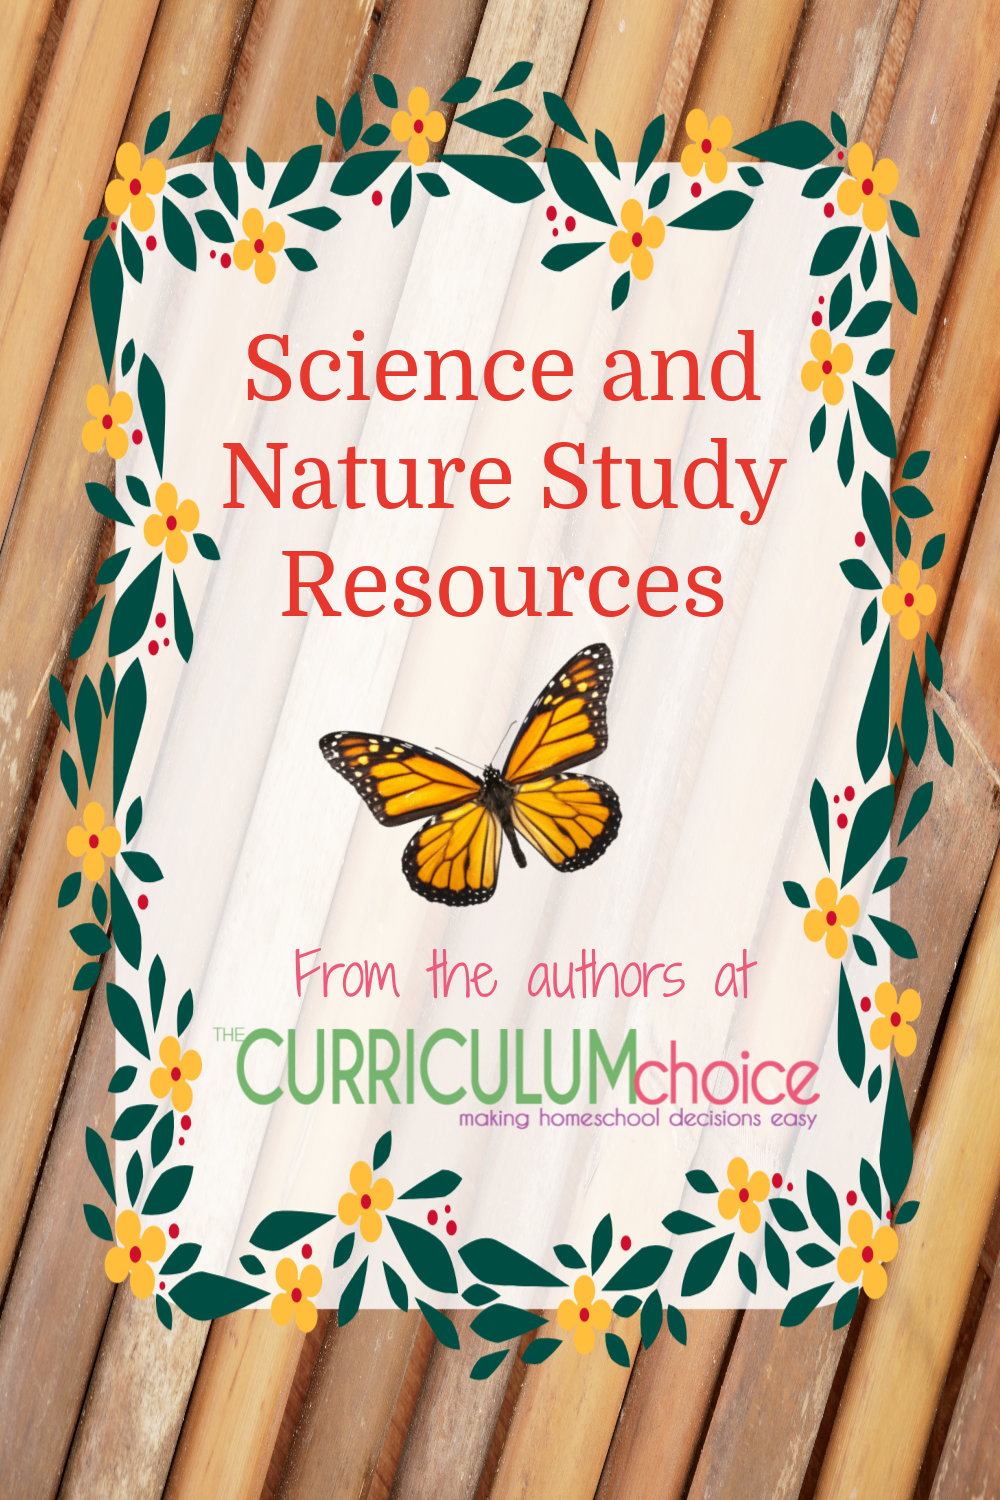 Homeschool Science and Nature Resources from Curriculum Choice Review Authors - a huge list compiled by veteran homeschoolers.